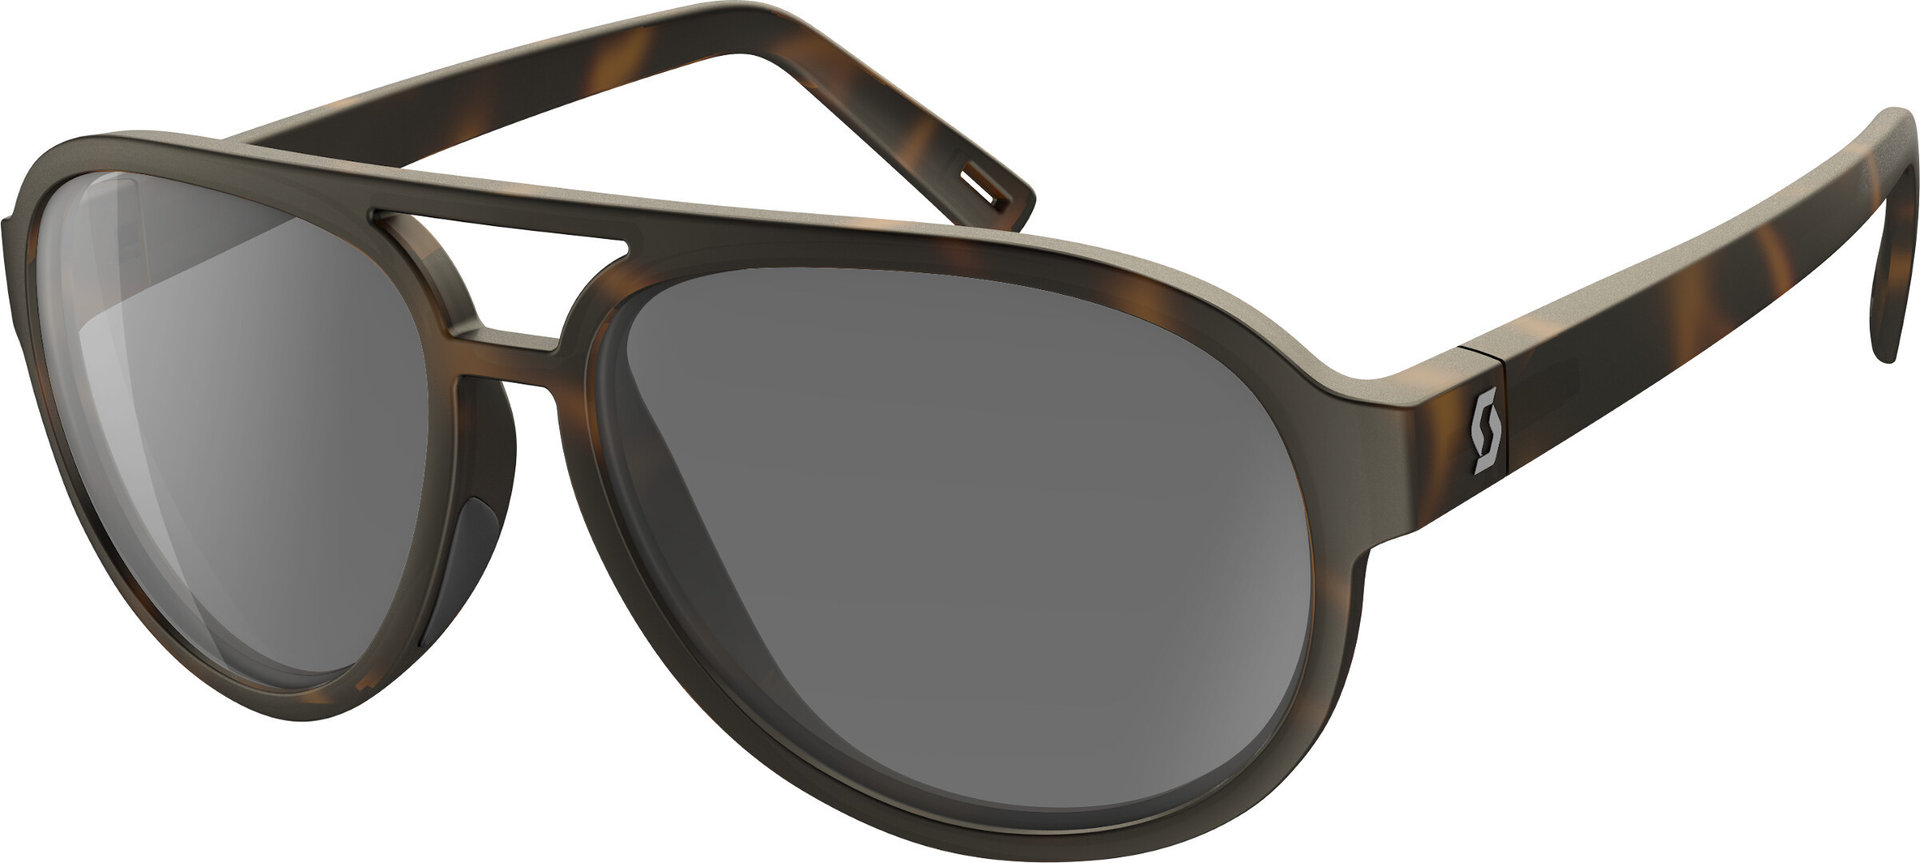 Scott Bass Sunglasses, brown, brown, Size One Size